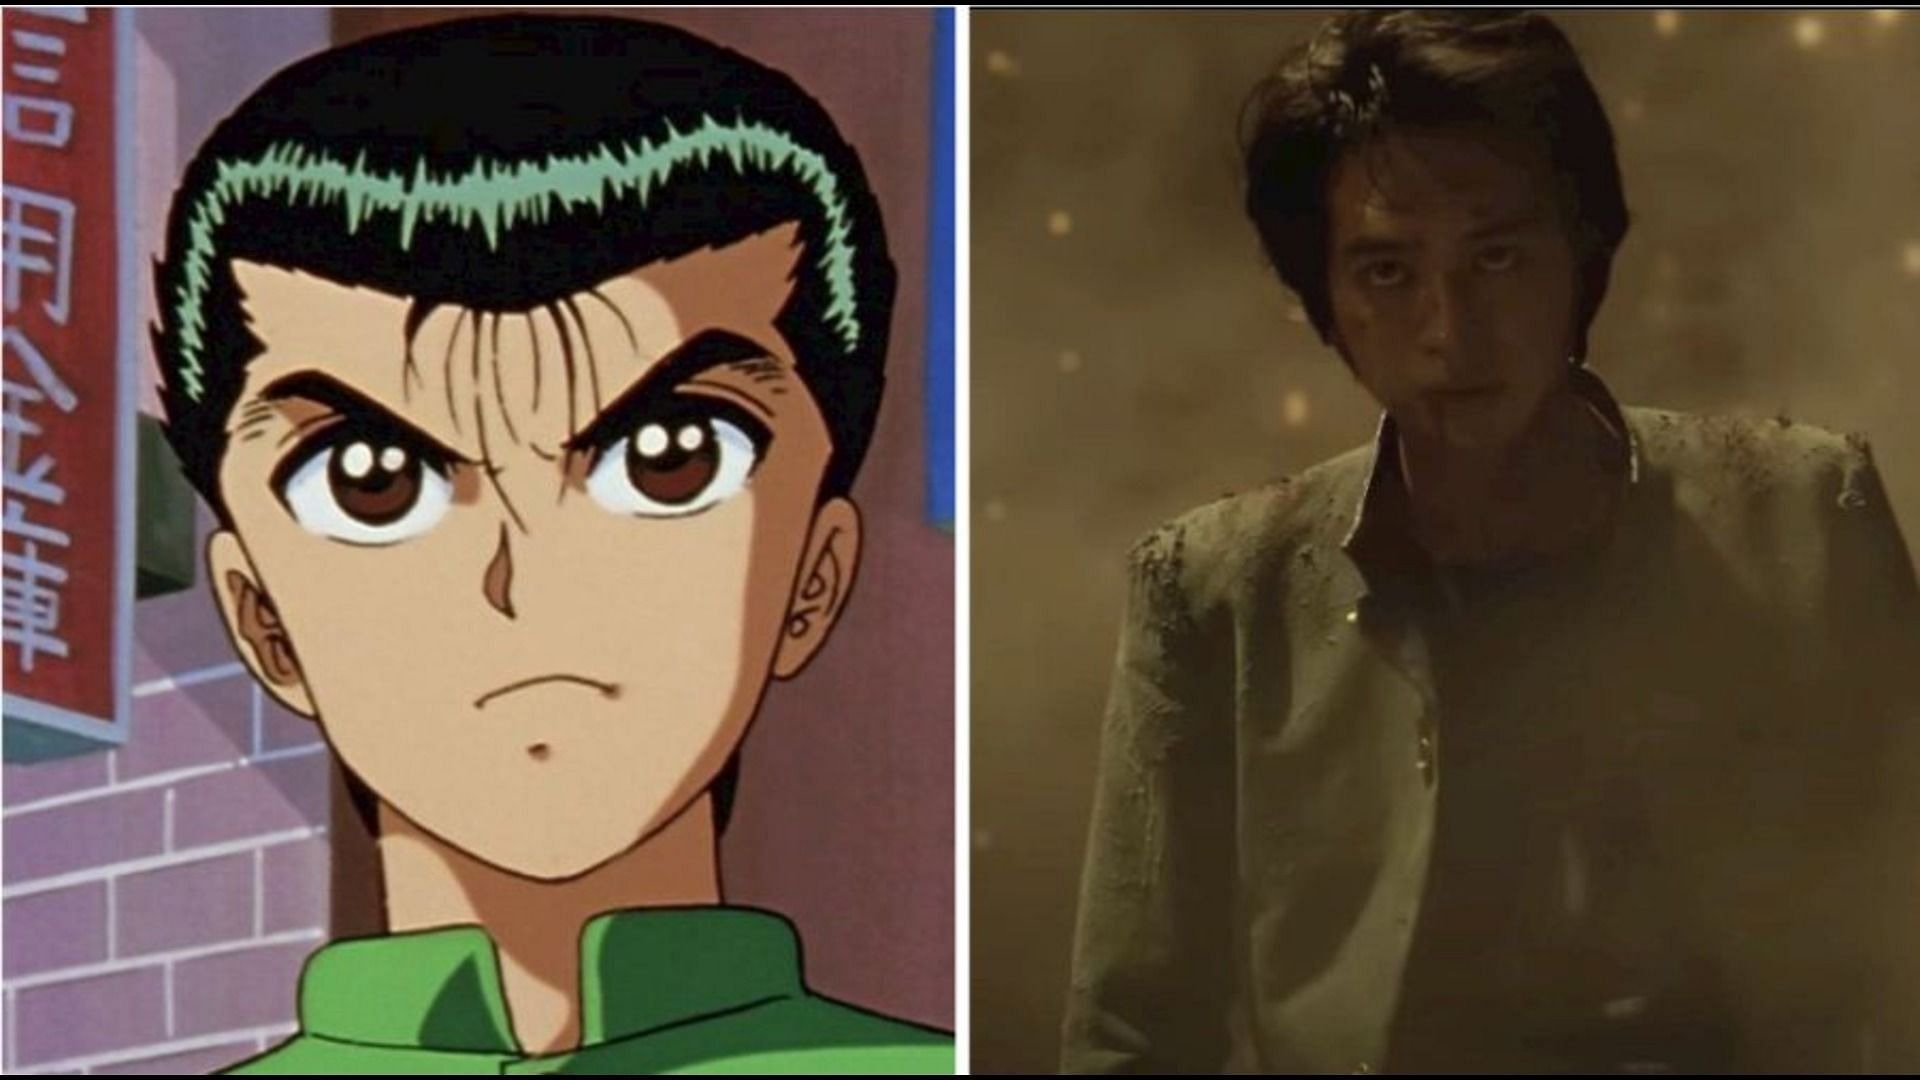 Every major Yu Yu Hakusho character who appears in Netflix's Live Action